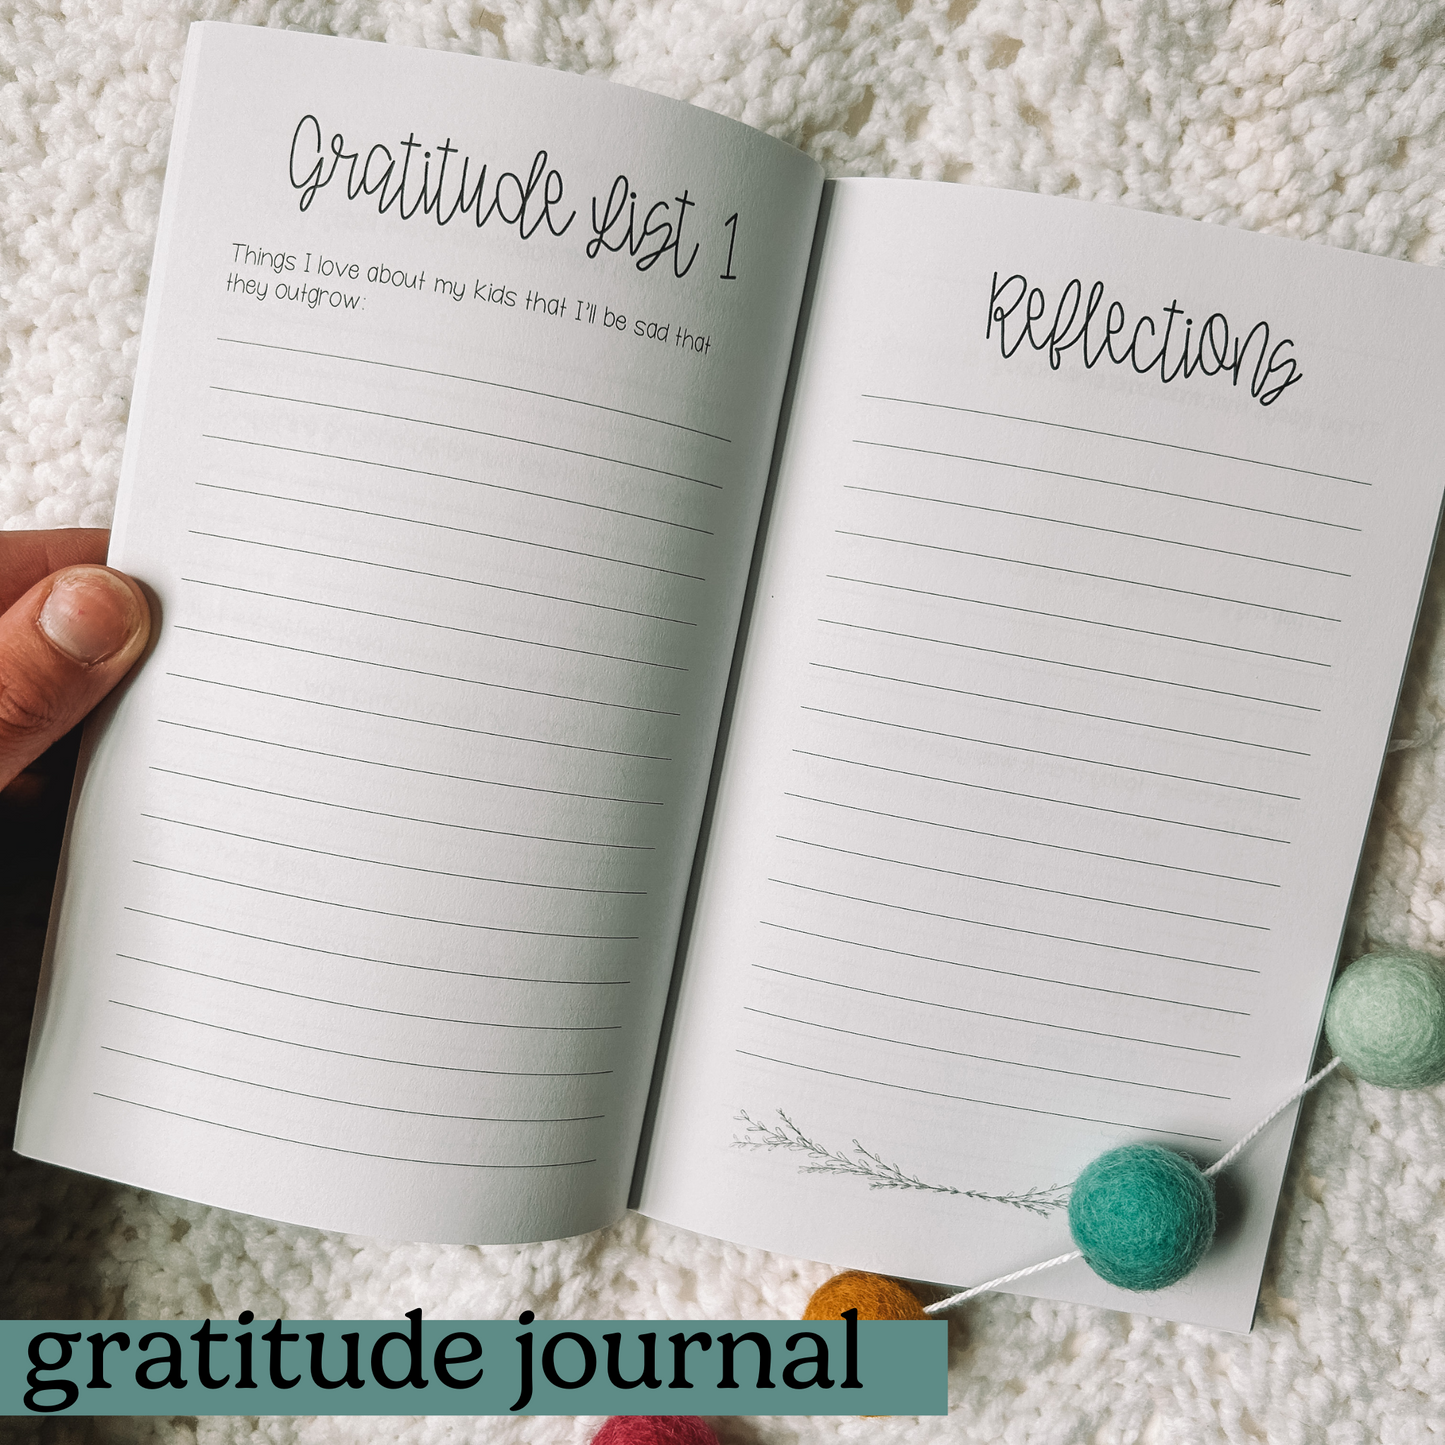 Gratitude list one is Things I love about my kids that I'll be sad that they outgrow with a full lined page. Opposite page is titled reflections with a full lined page.